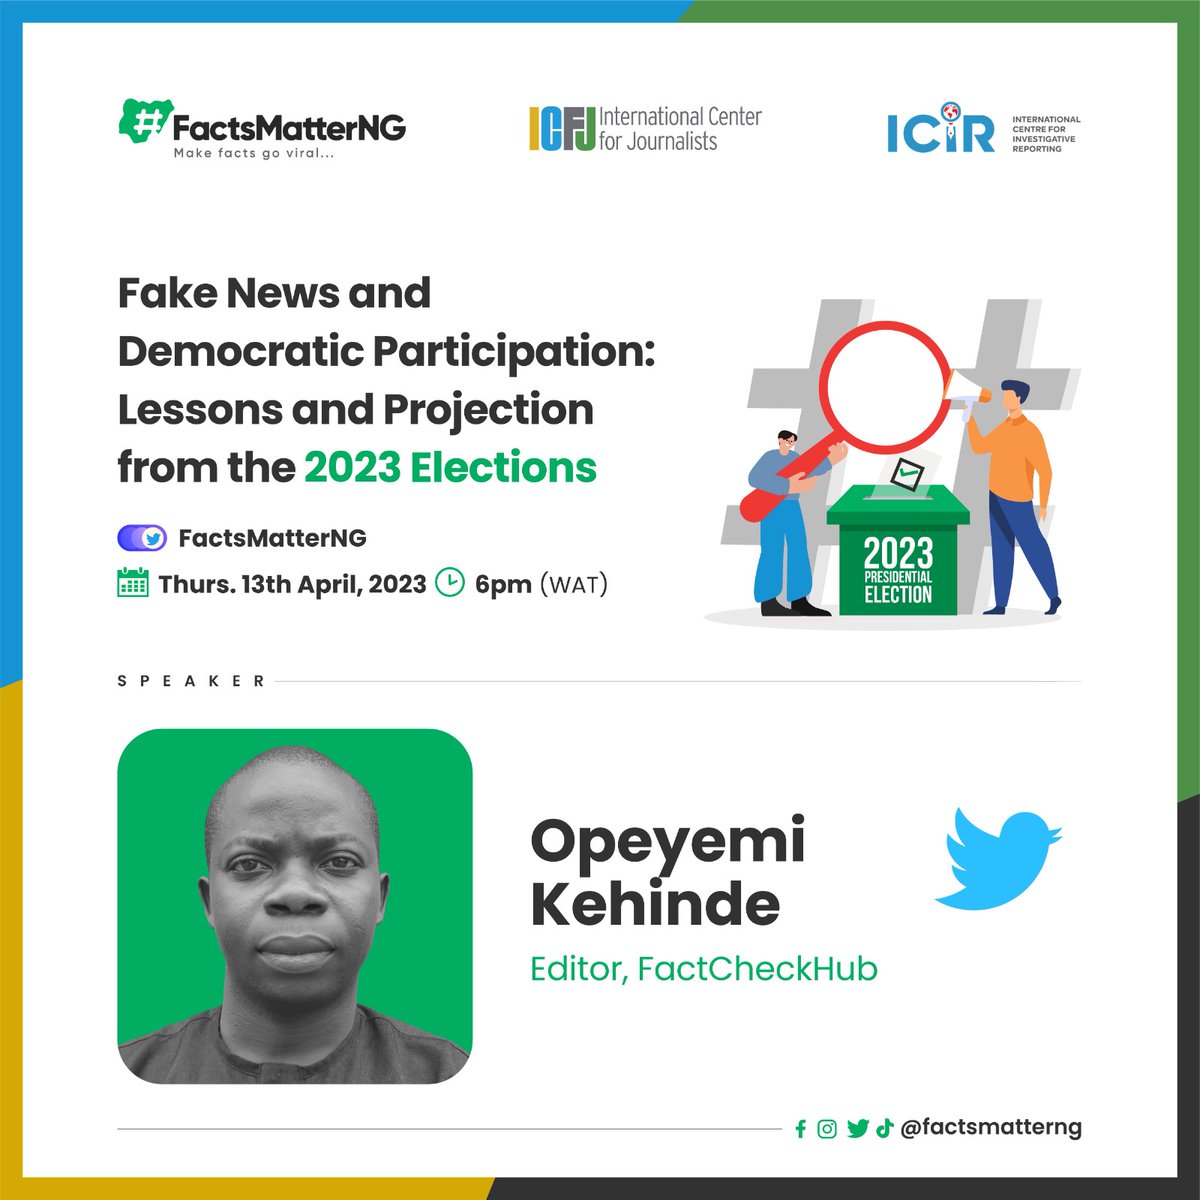 Join us tomorrow on Twitter Space, as we discuss the topic:  

#FakeNews and Democratic  Participation: Lessons and Projection from #Nigeria's #2023Elections

Set a reminder here: twitter.com/i/spaces/1gqxv…

Time: 6:00pm
Date: Thursday, April 13, 2023.

#FakeNews #Nigeriadecides2023